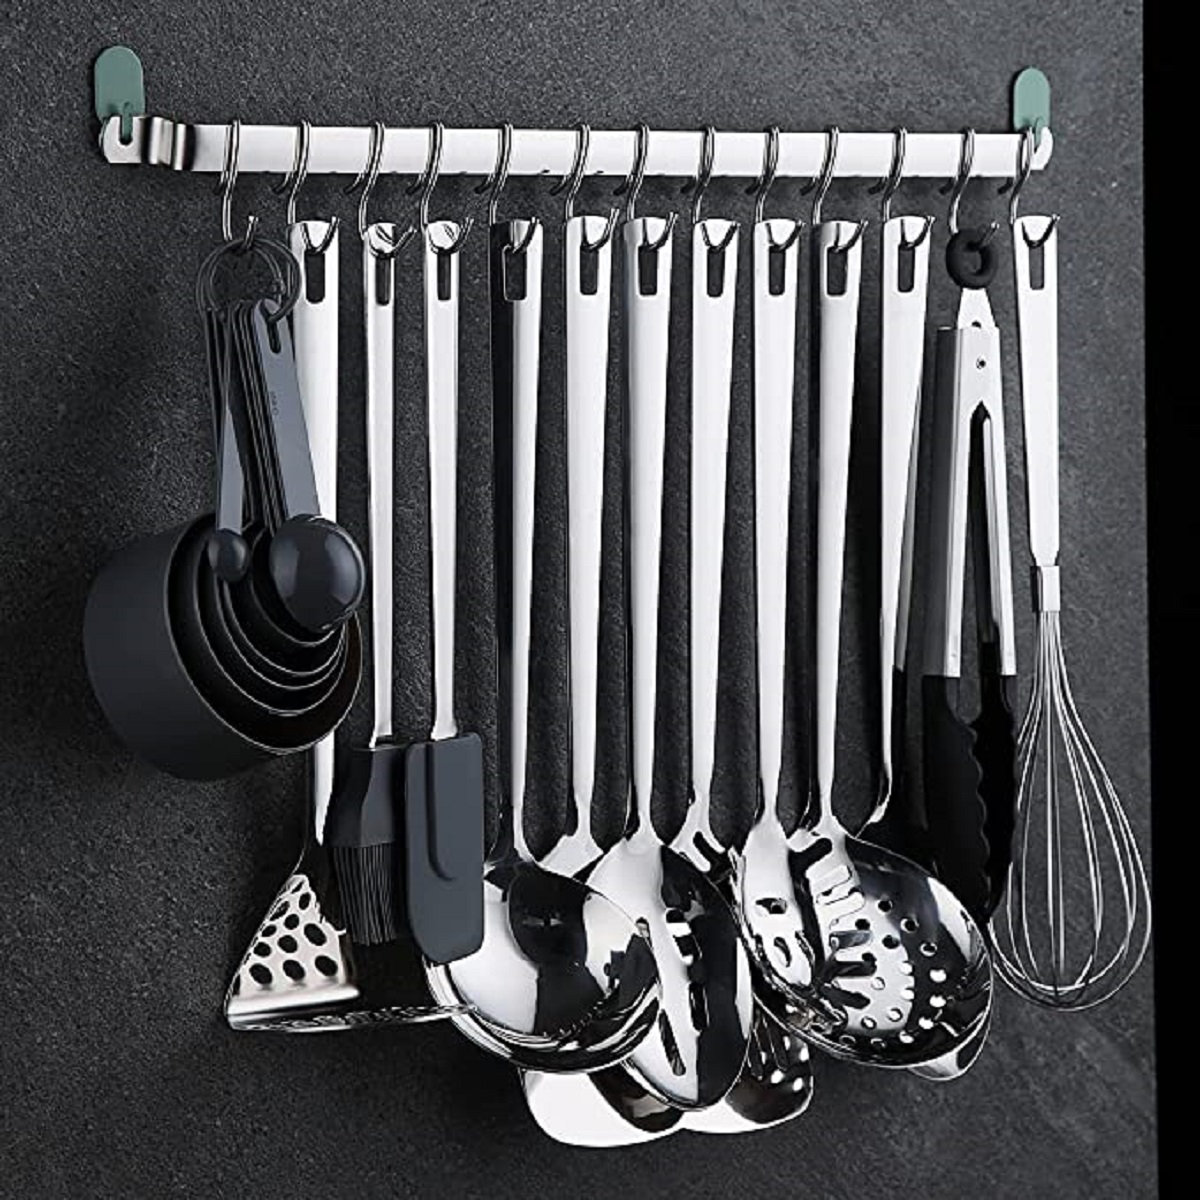 Stainless Steel Cooking Utensils Set,37 Pieces Kitchen Utensils Set, Kitchen  Tool Gadgets Set with Utensil Holder Non-Stick and Heat Resistant Dishwasher  Safe